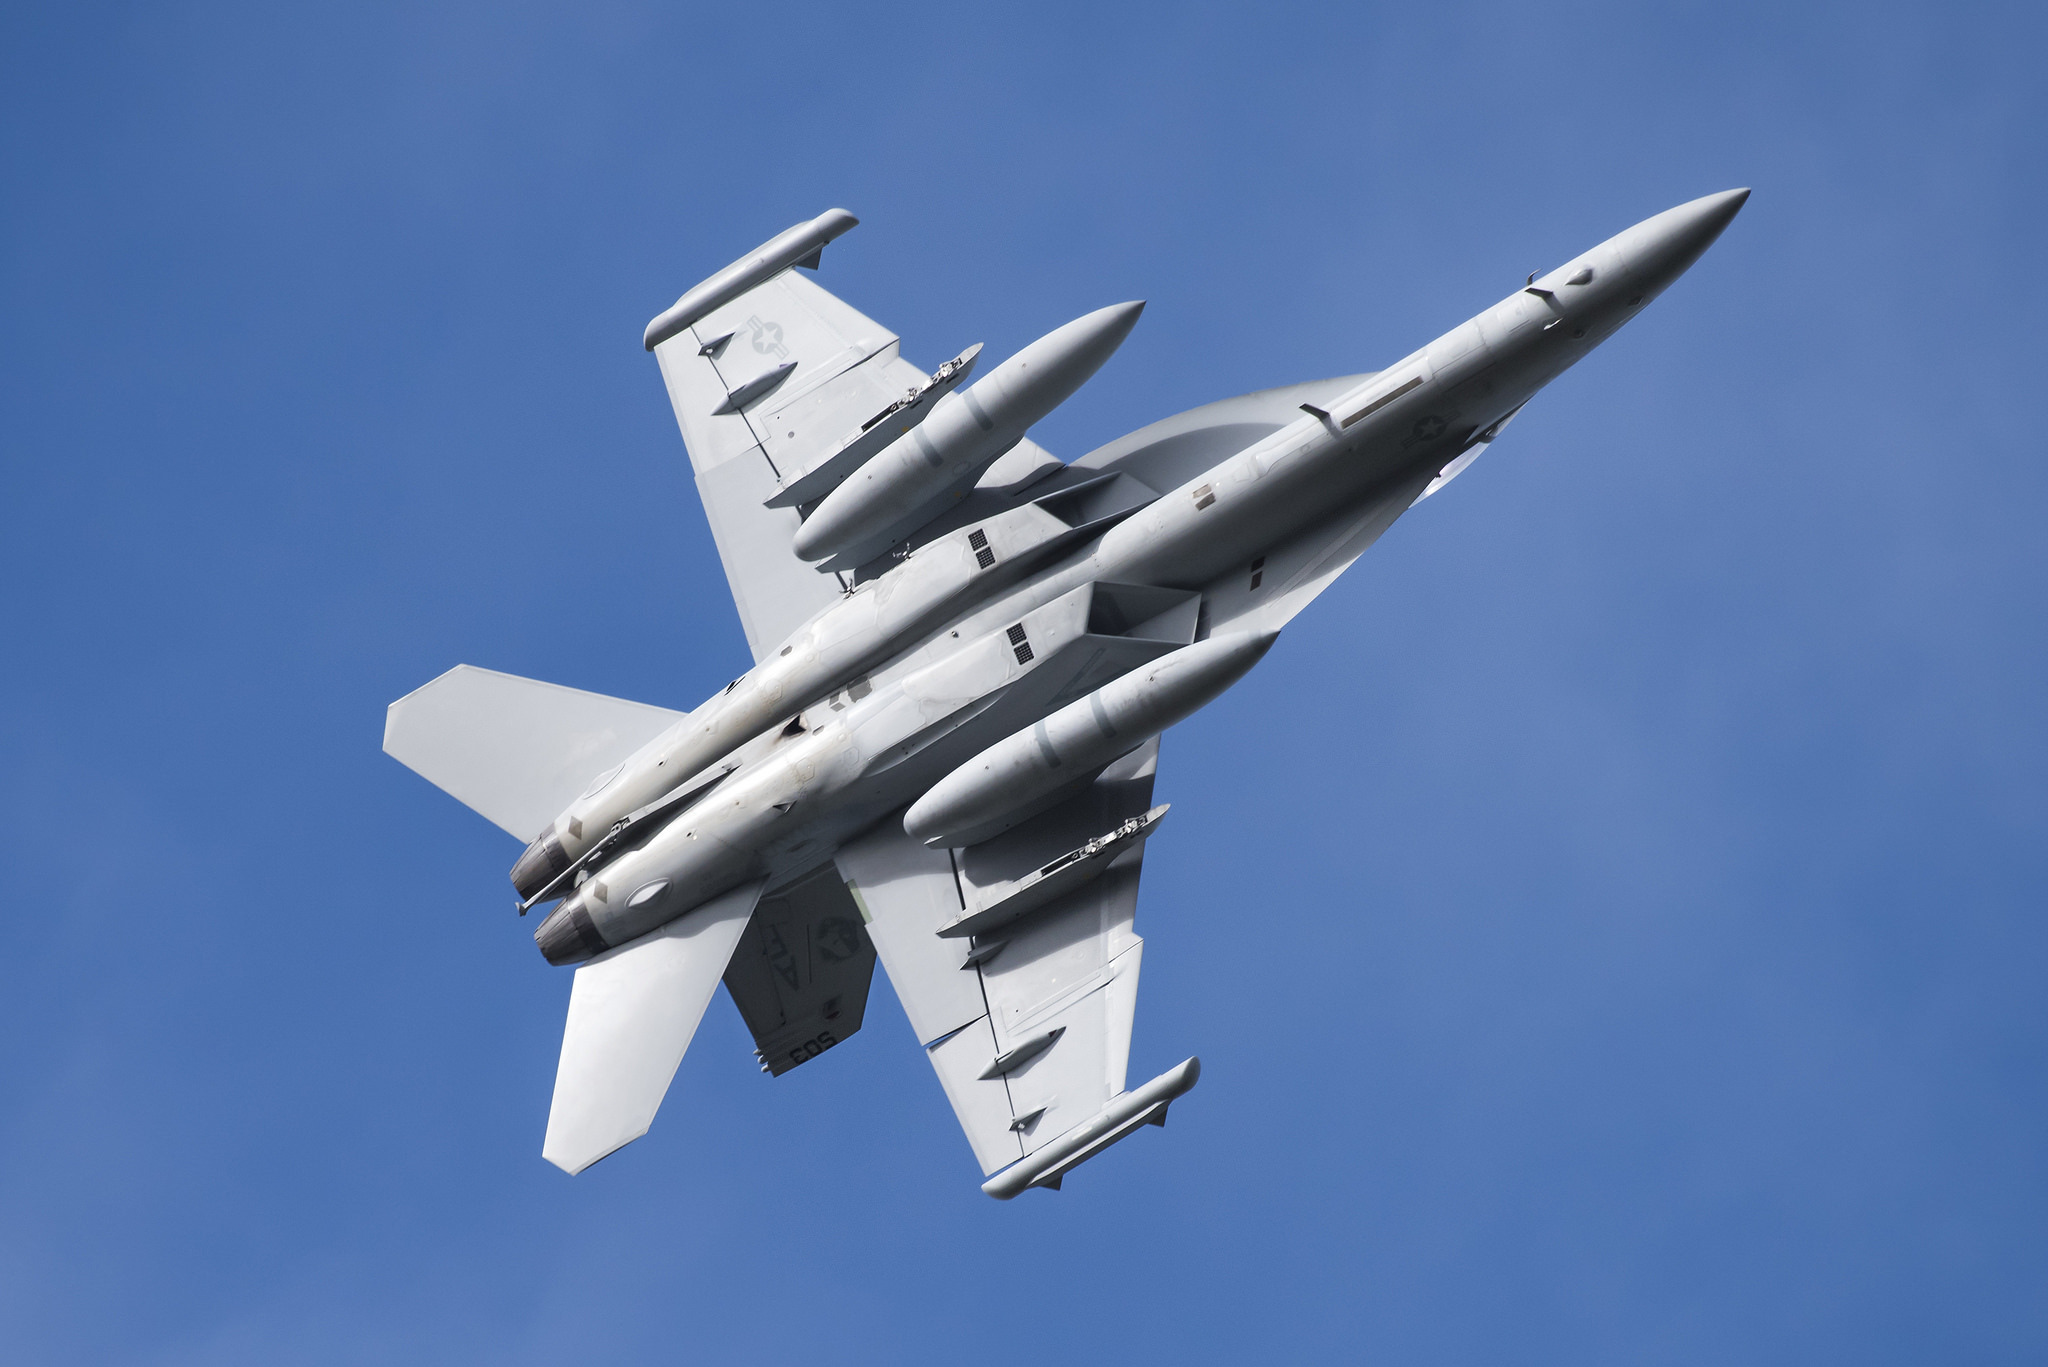 General 2048x1367 aircraft military aircraft military vehicle McDonnell Douglas F/A-18 Hornet military vehicle McDonnell Douglas American aircraft